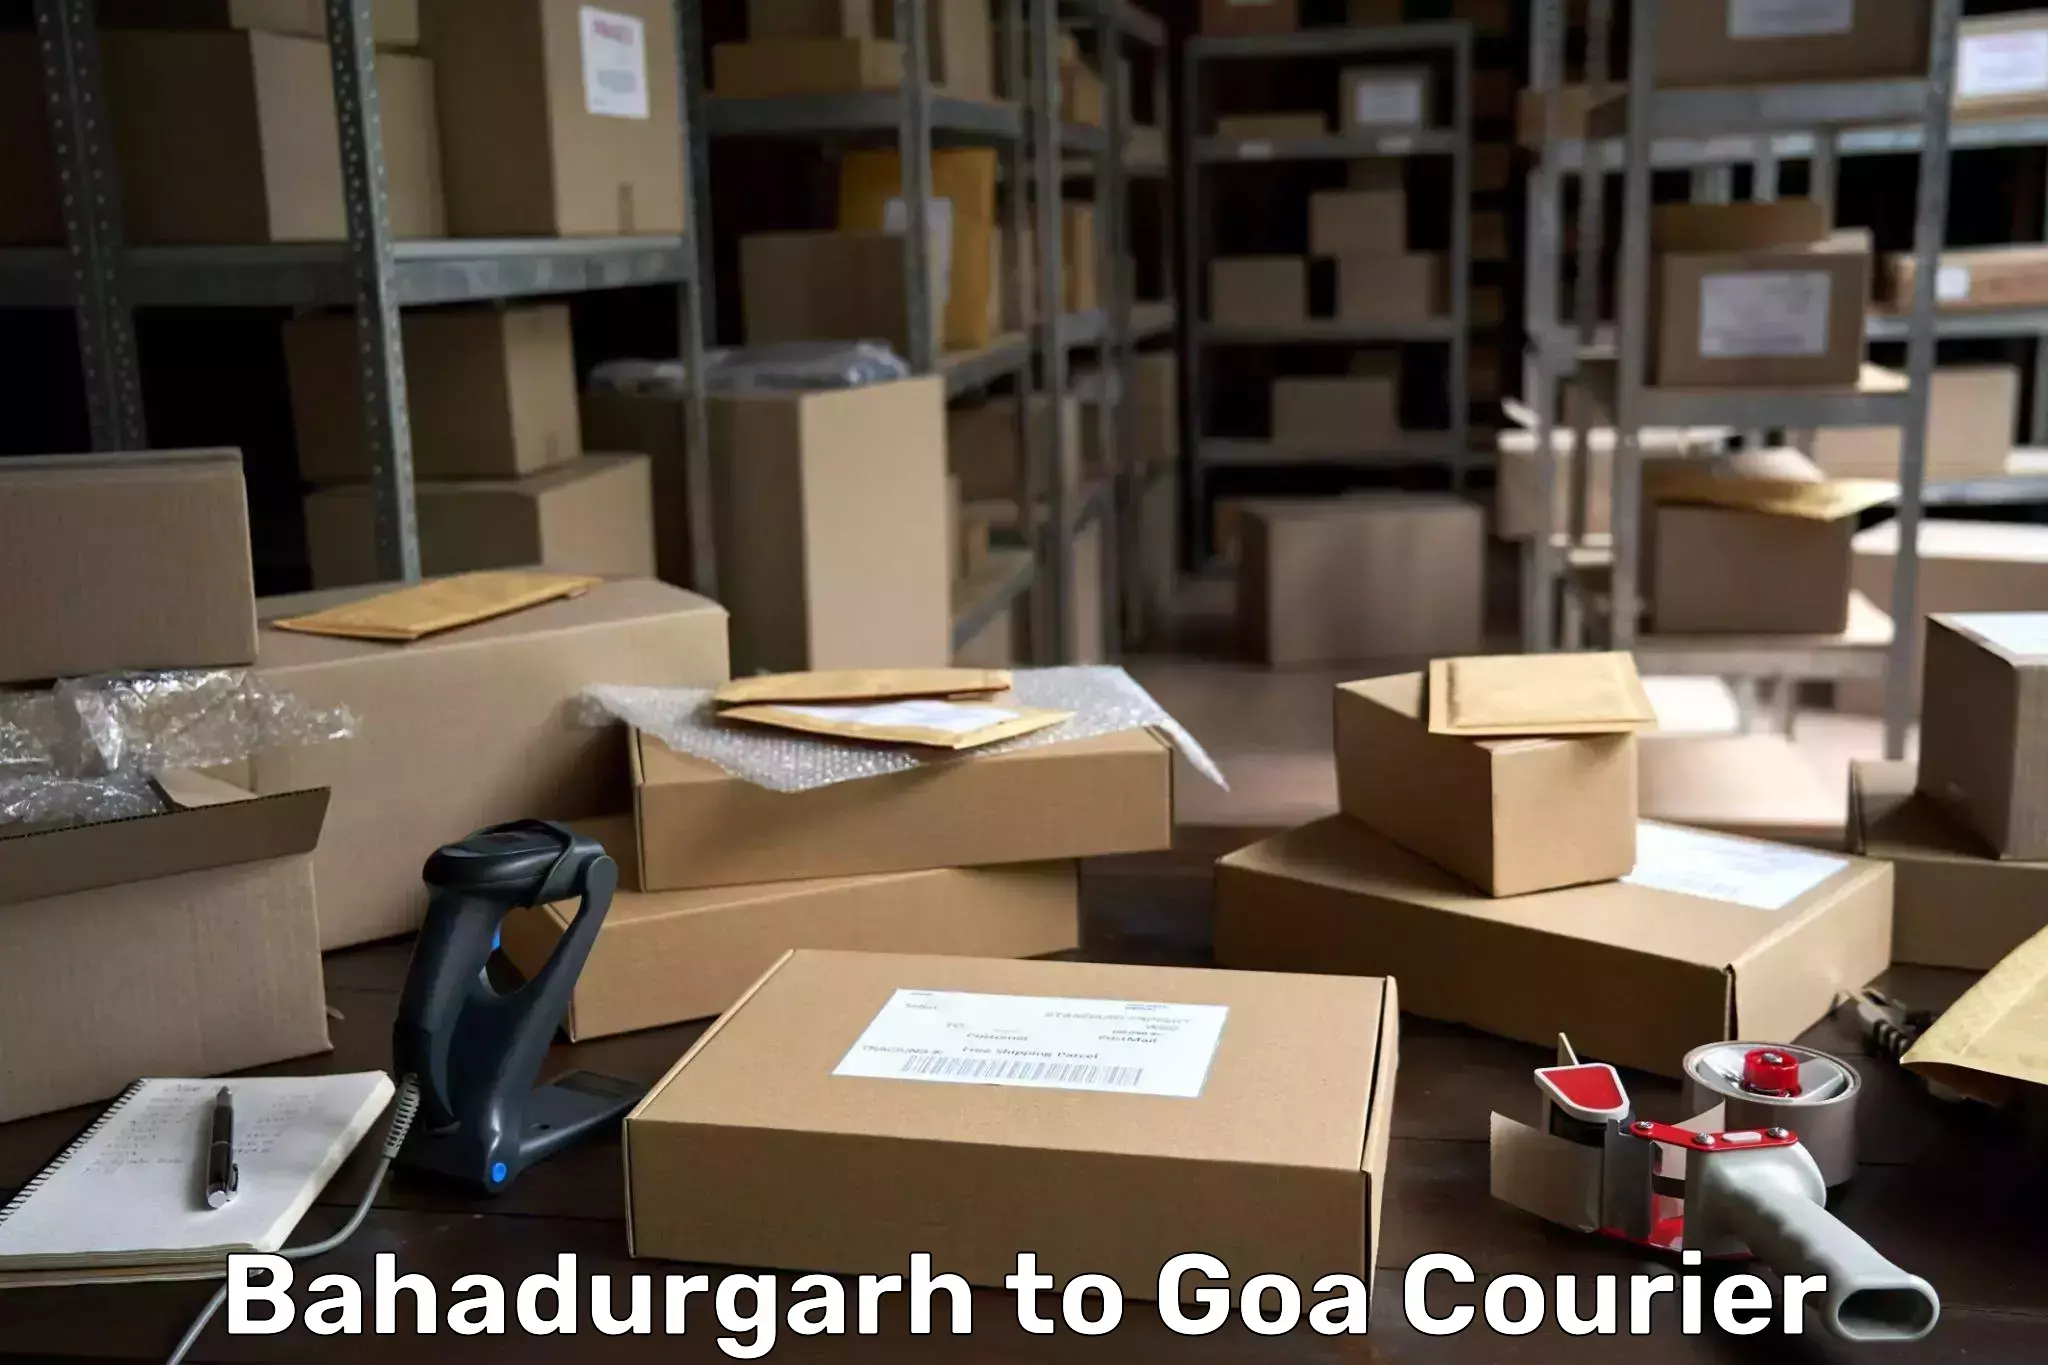 State-of-the-art courier technology Bahadurgarh to Goa